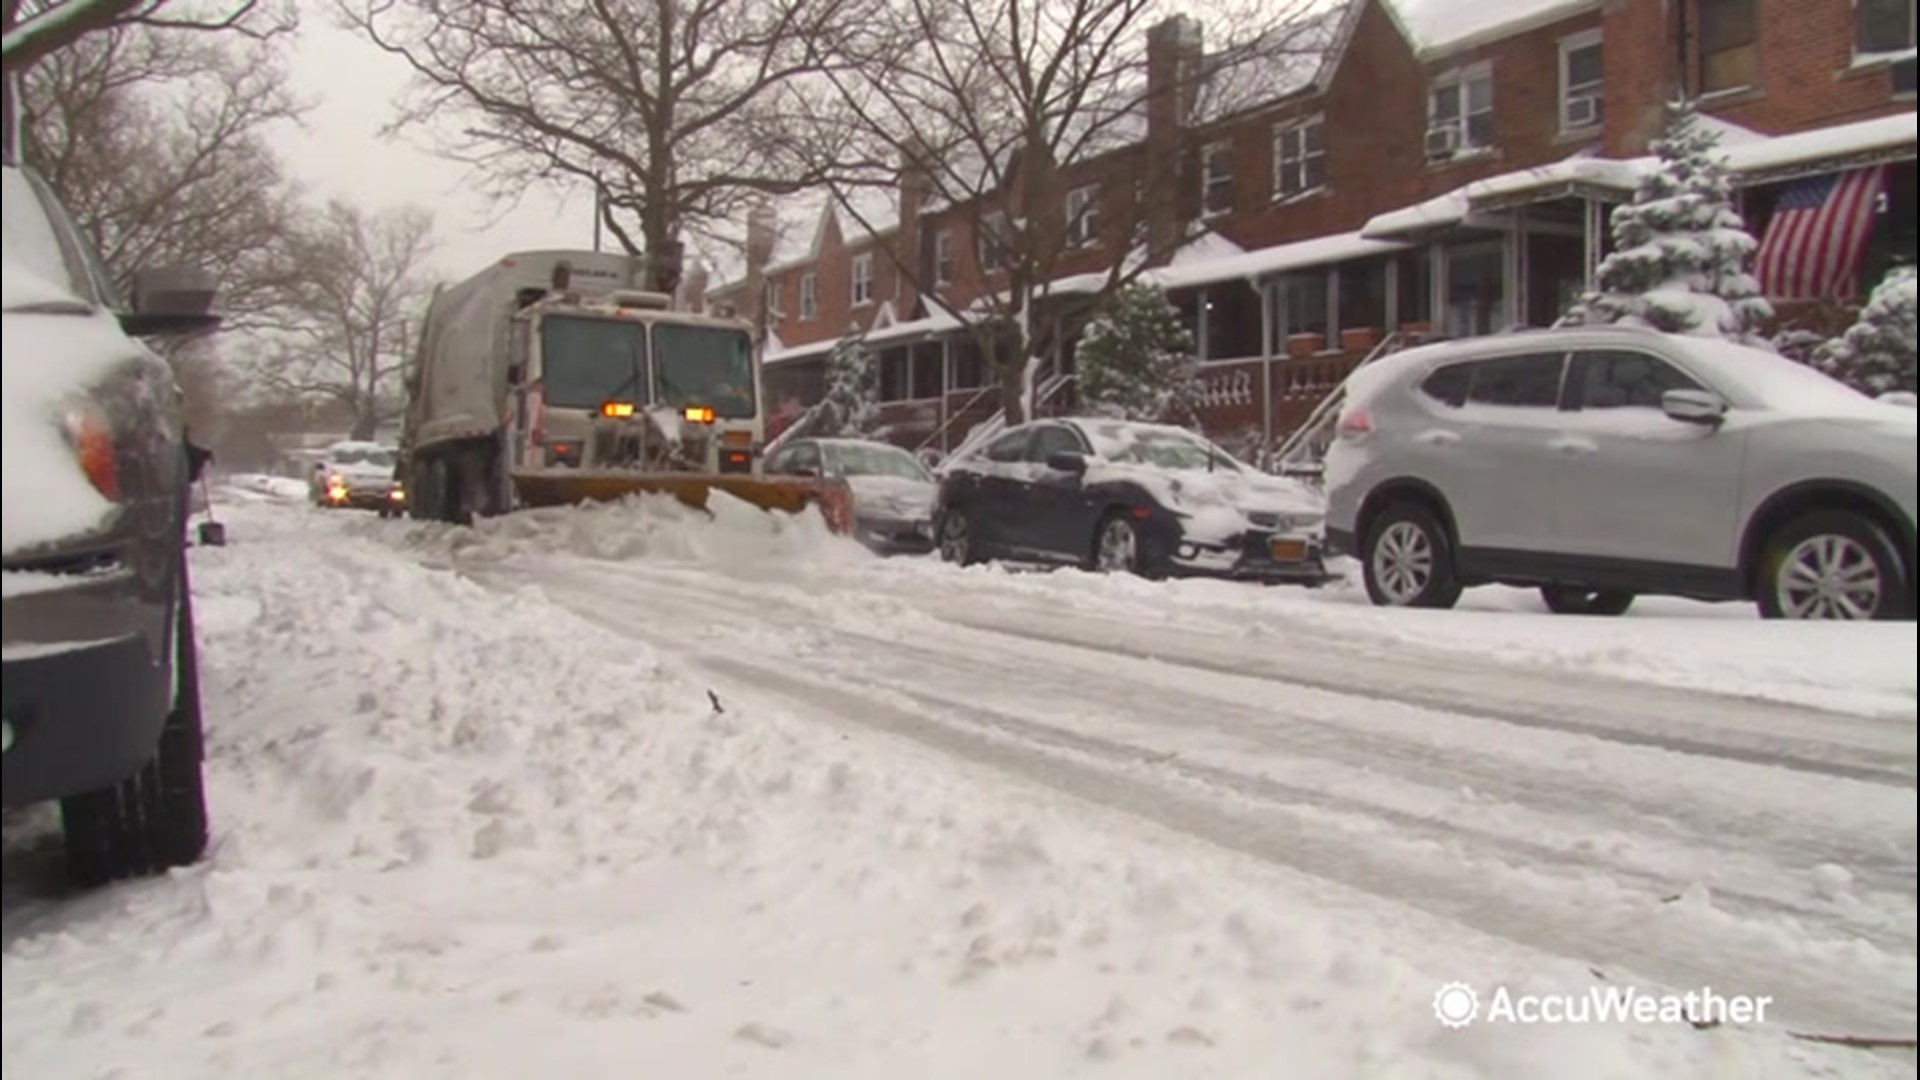 Accuweather's Dexter Henry talked to the New York City Department of Sanitation about how the city is preparing for snow season.